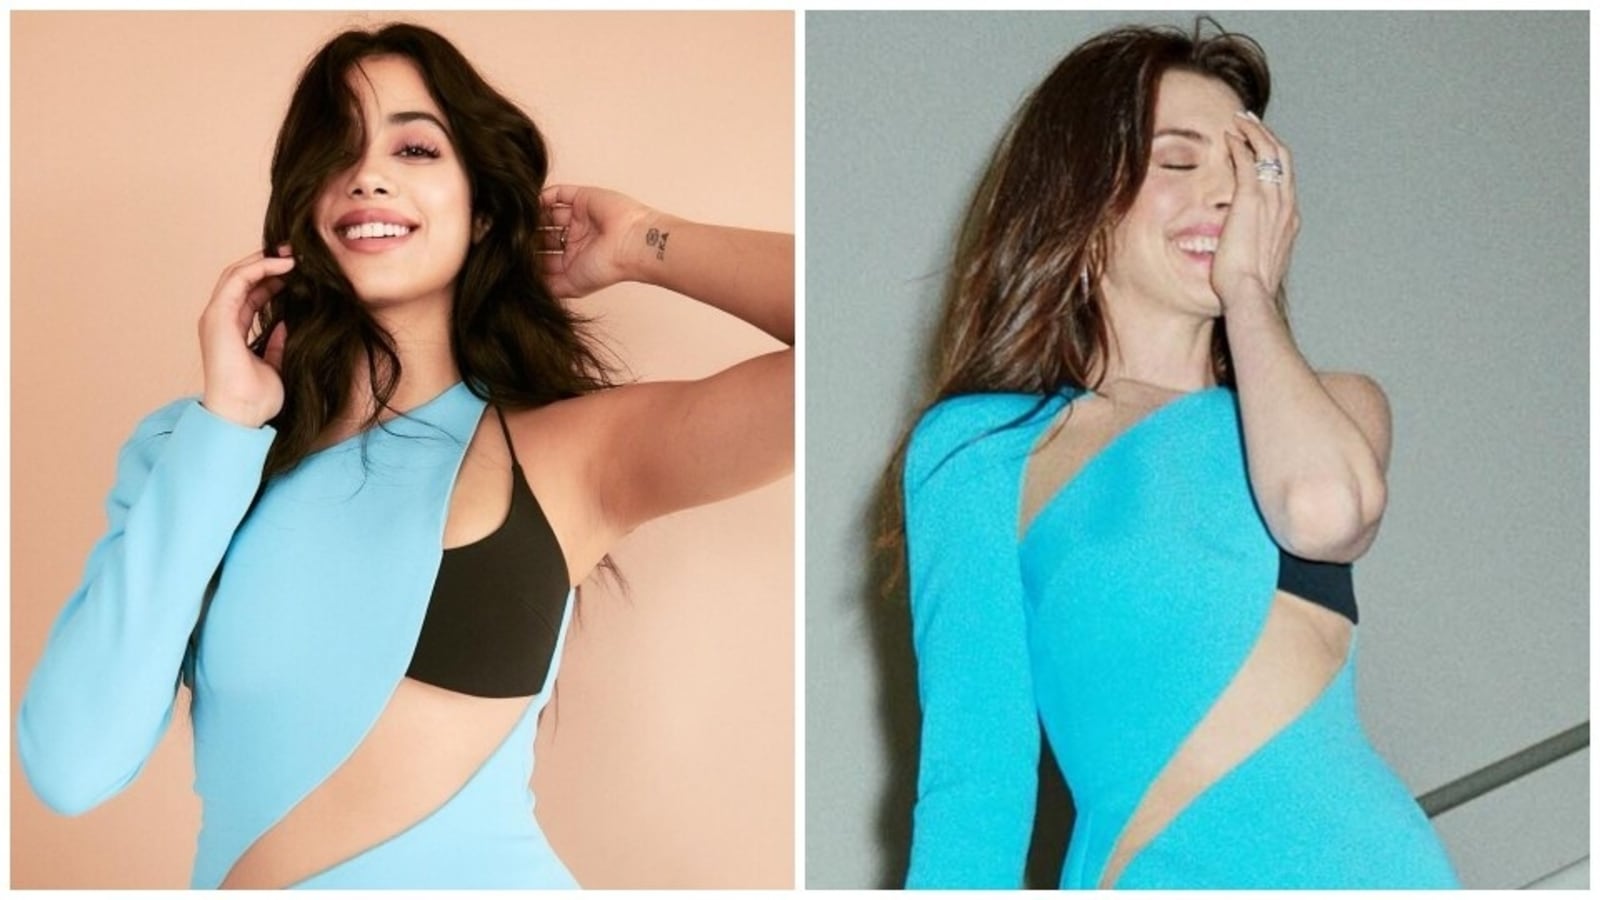 Janhvi Kapoor wears the same cut-out dress as Anne Hathaway for Good Luck Jerry promotions: Who wore it better?